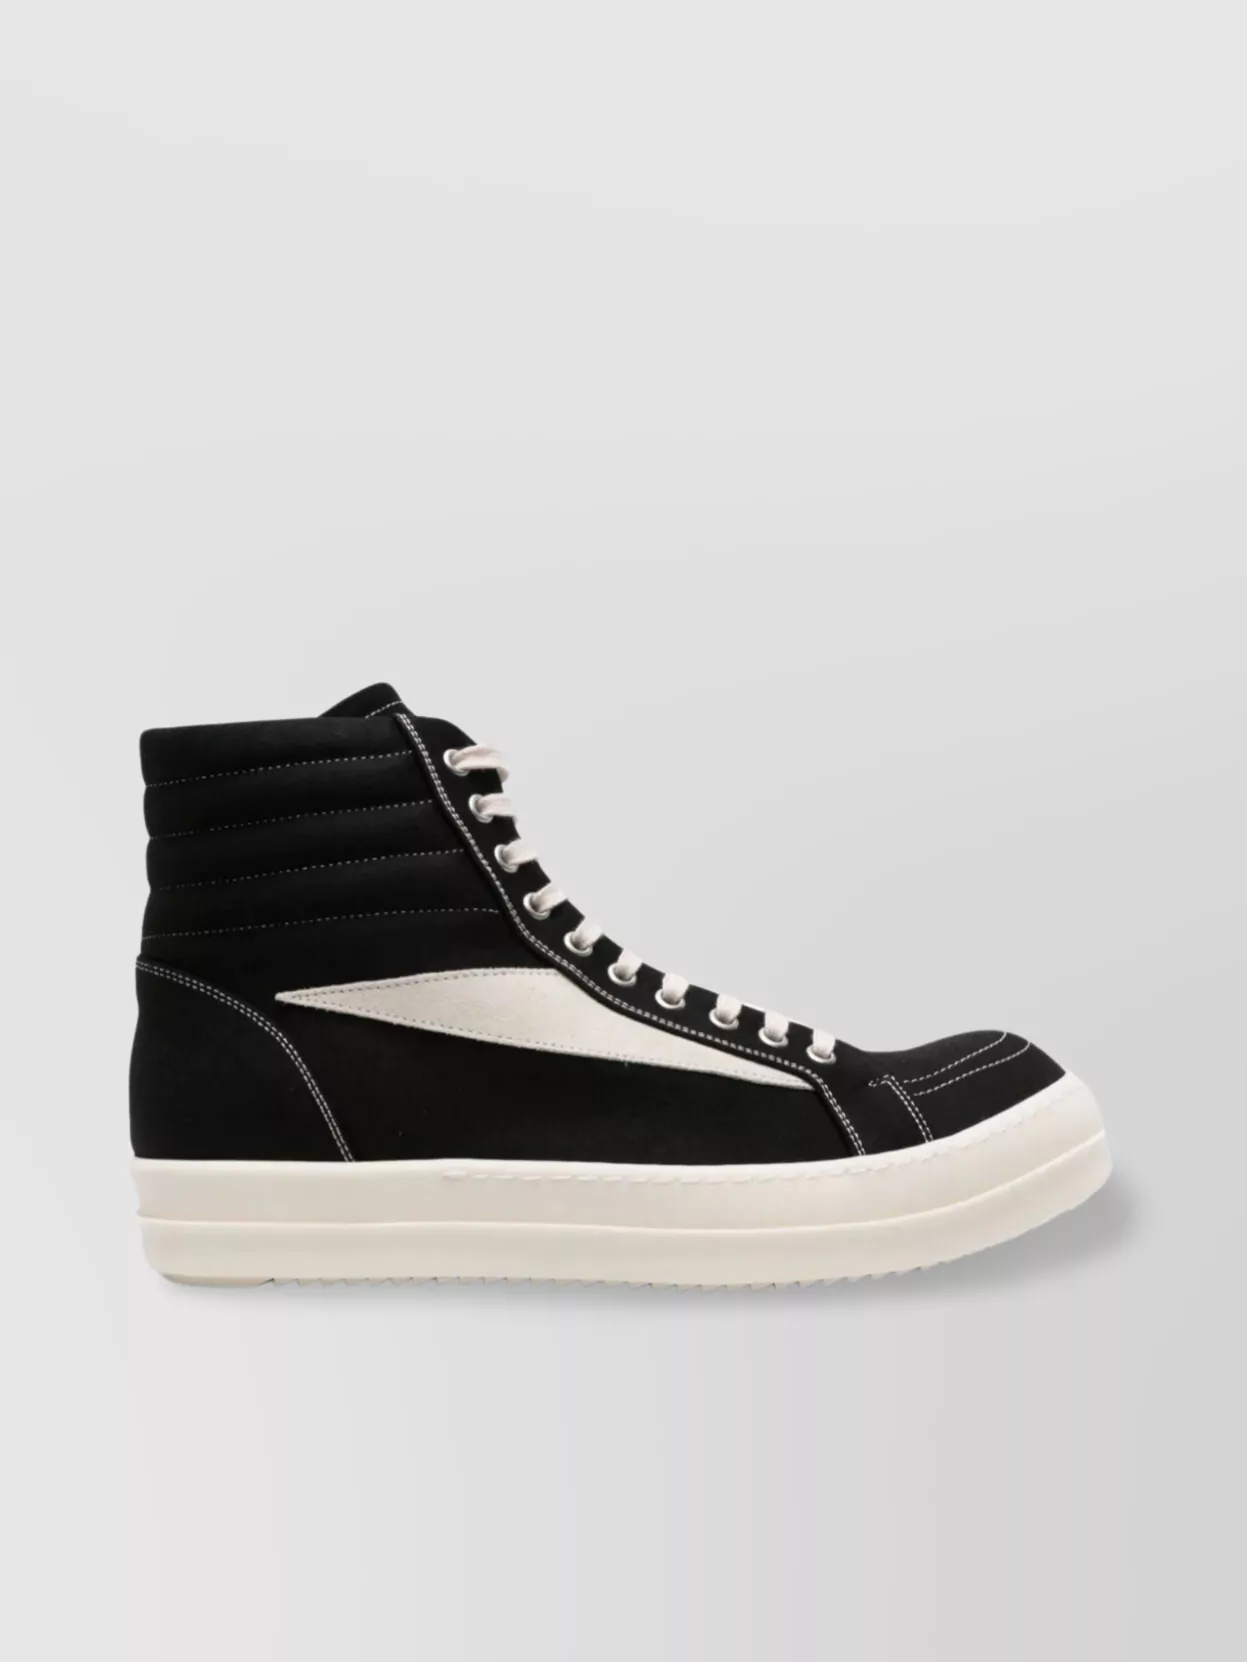 Shop Rick Owens Drkshdw Retro High-top Sneakers With Shark Tooth Soles